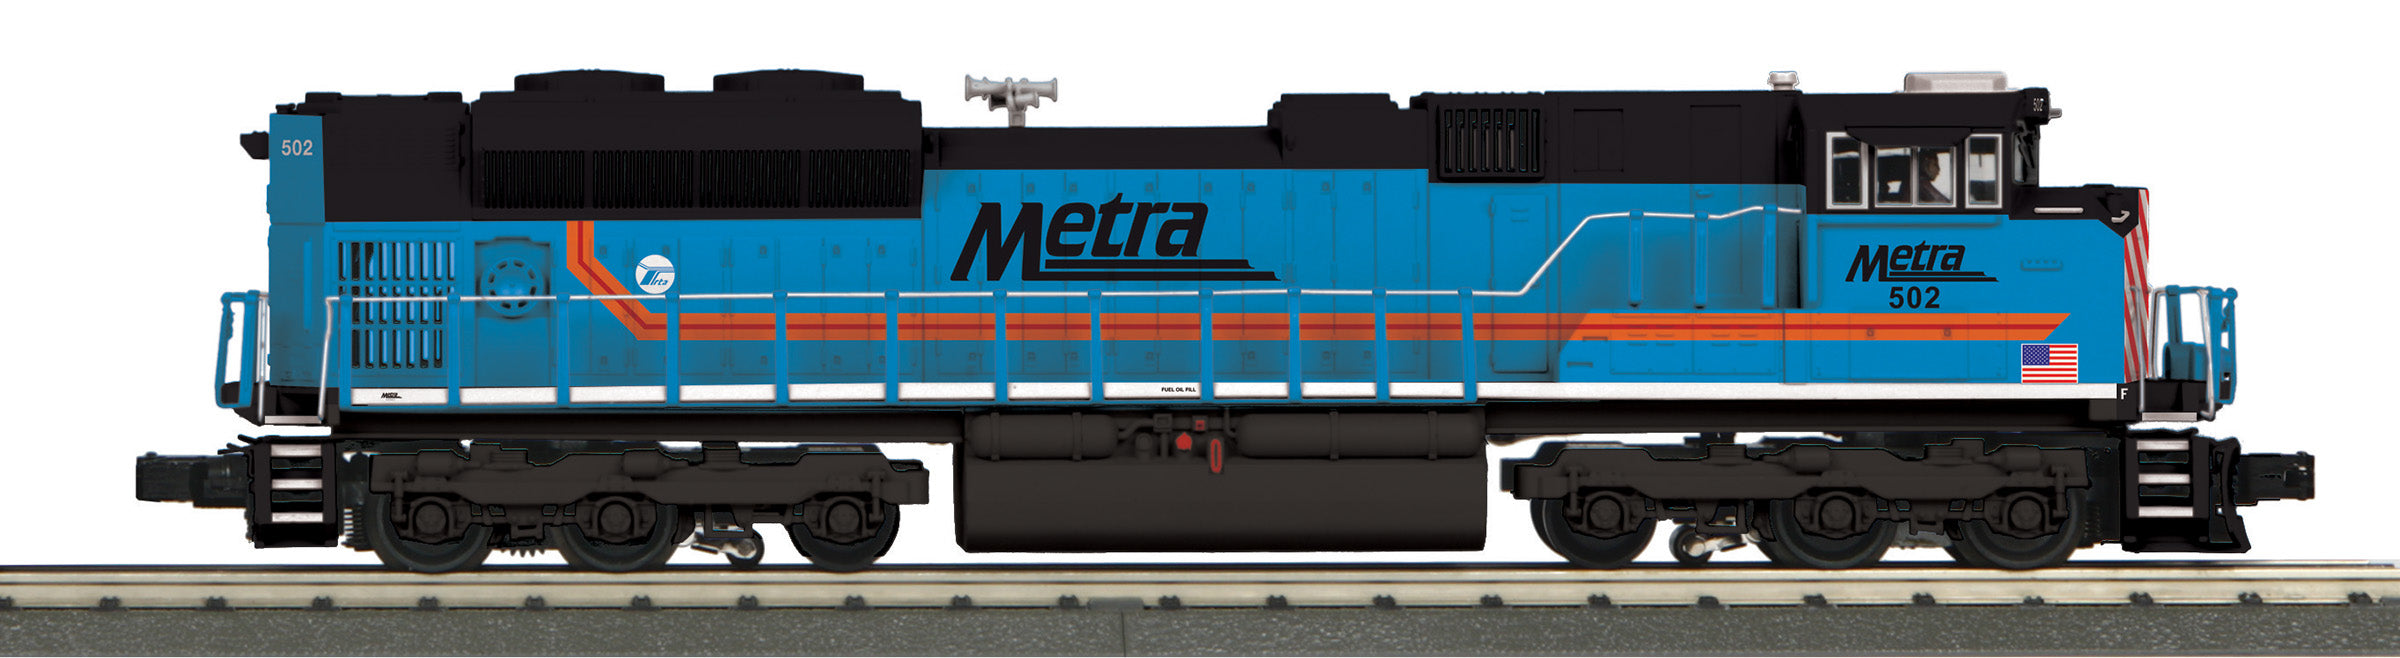 MTH 30-21244-1 - SD70ACe Imperial Diesel Engine "Metra" #500 w/ PS3 - Custom Run for MrMuffin'sTrains